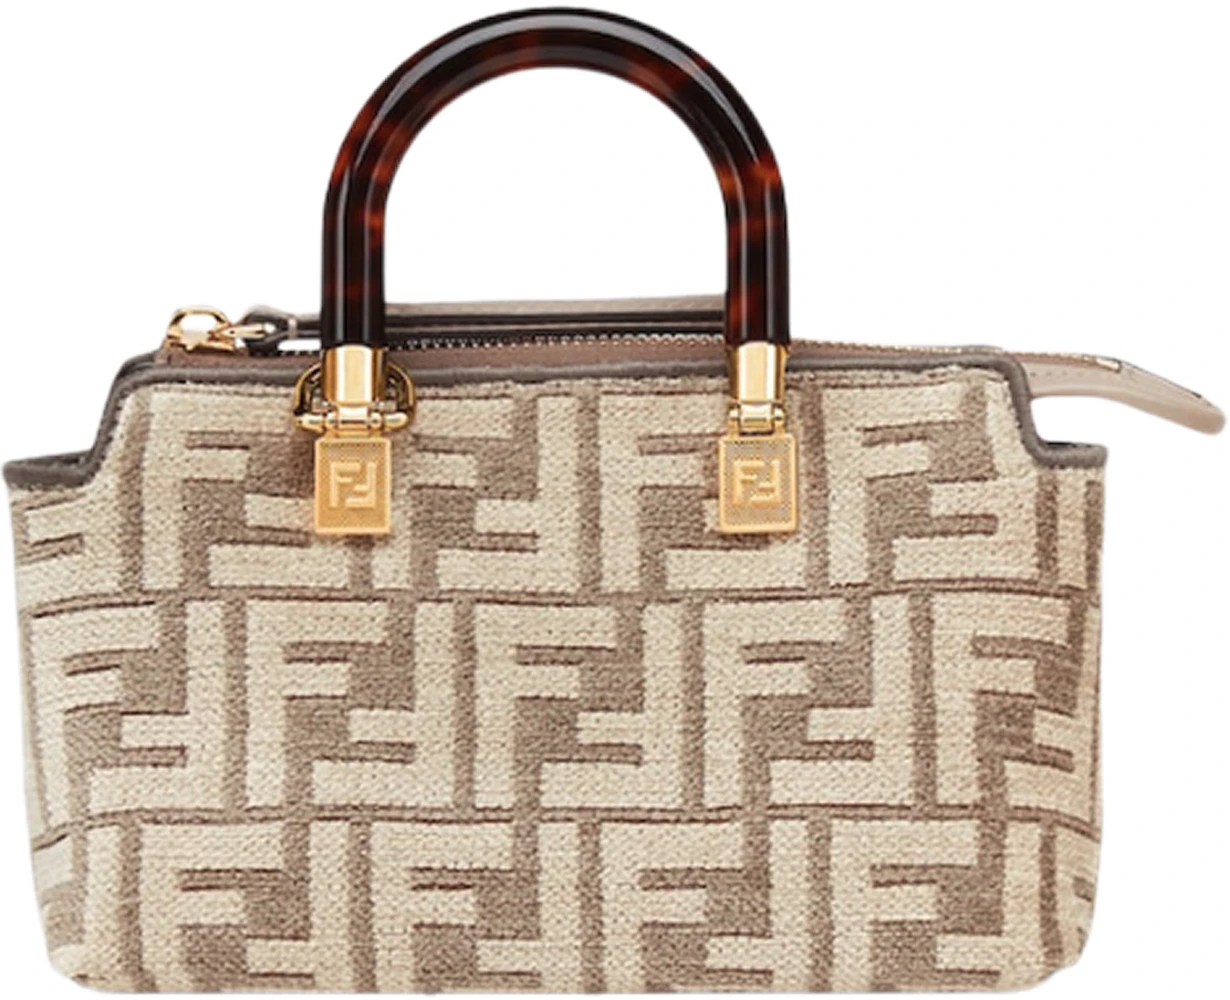 By The Way Boston Mini Bag FENDI : The art of Expression is a must